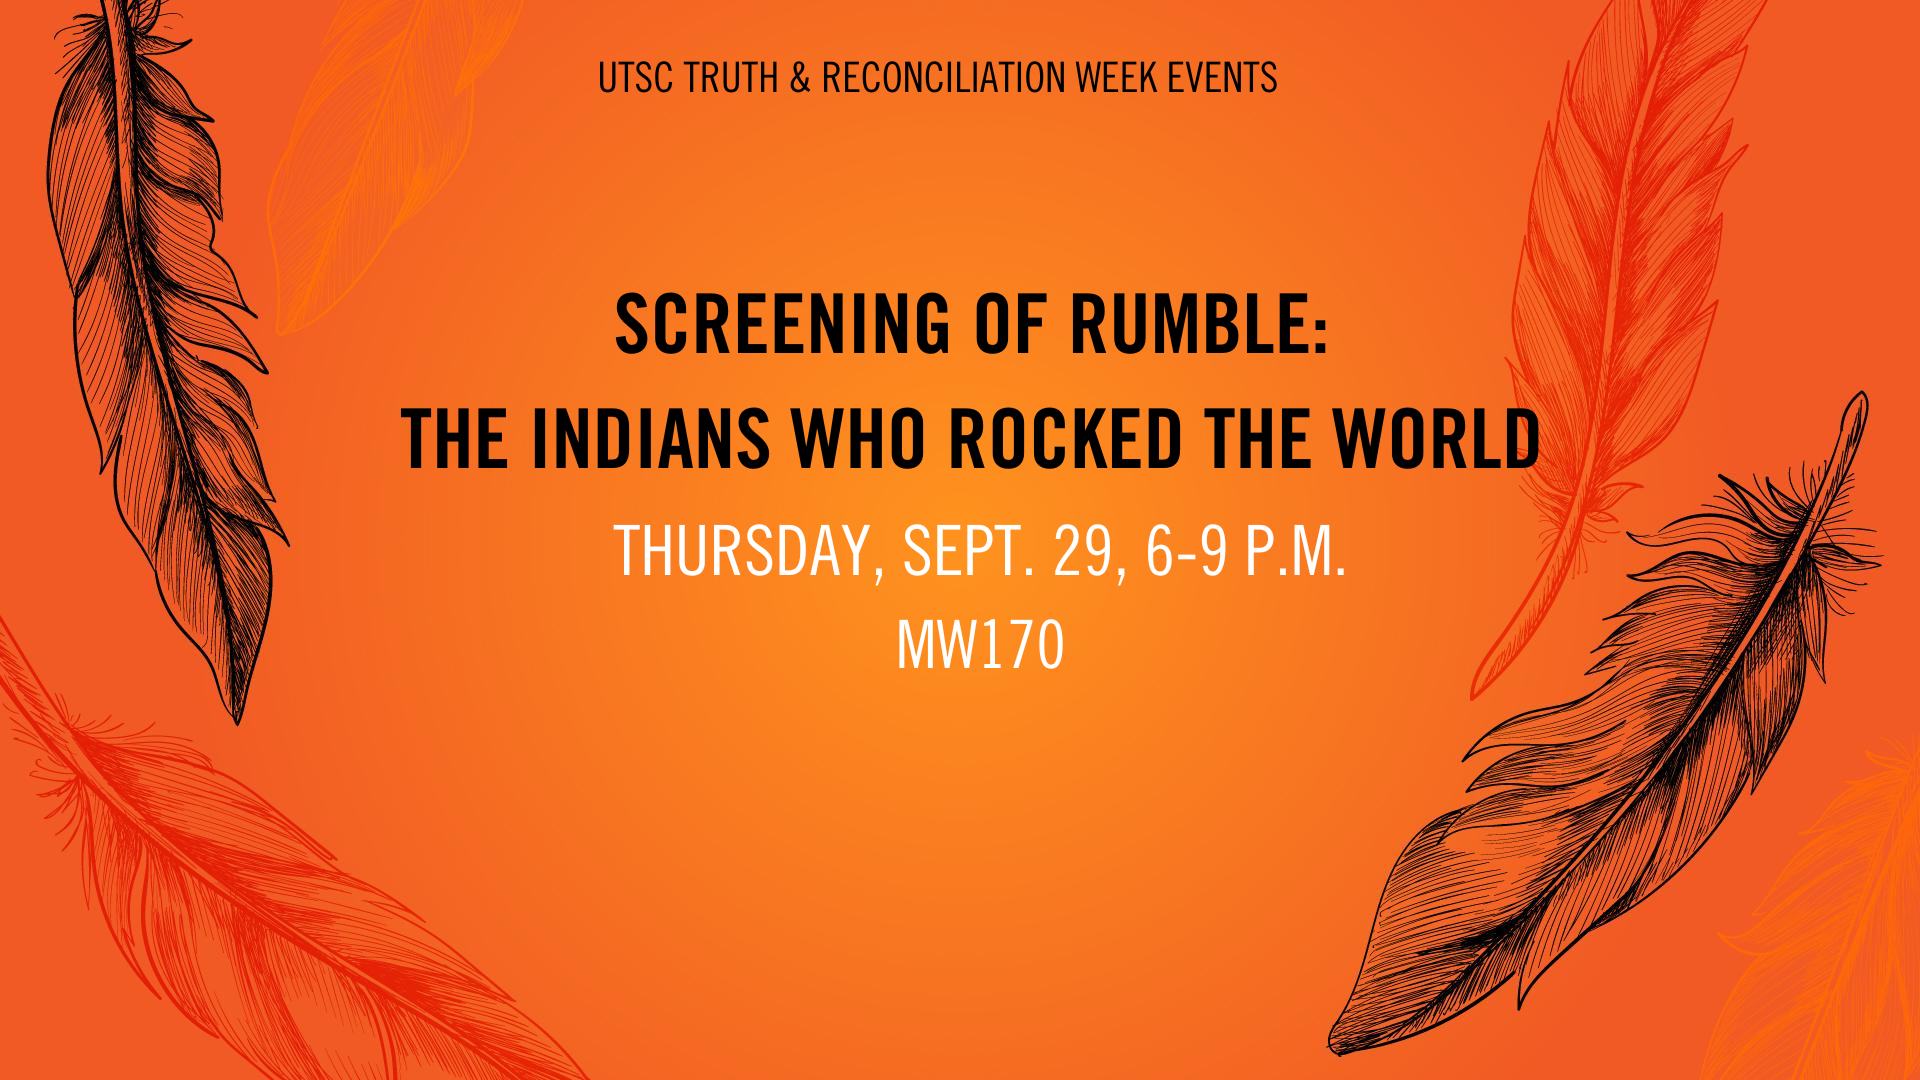 screening of rumble: the indians who rocked the world in bold, black text across an orange banner. underneath Thursday, sept. 29, 6-9 PM MW170 in thin, white writing.